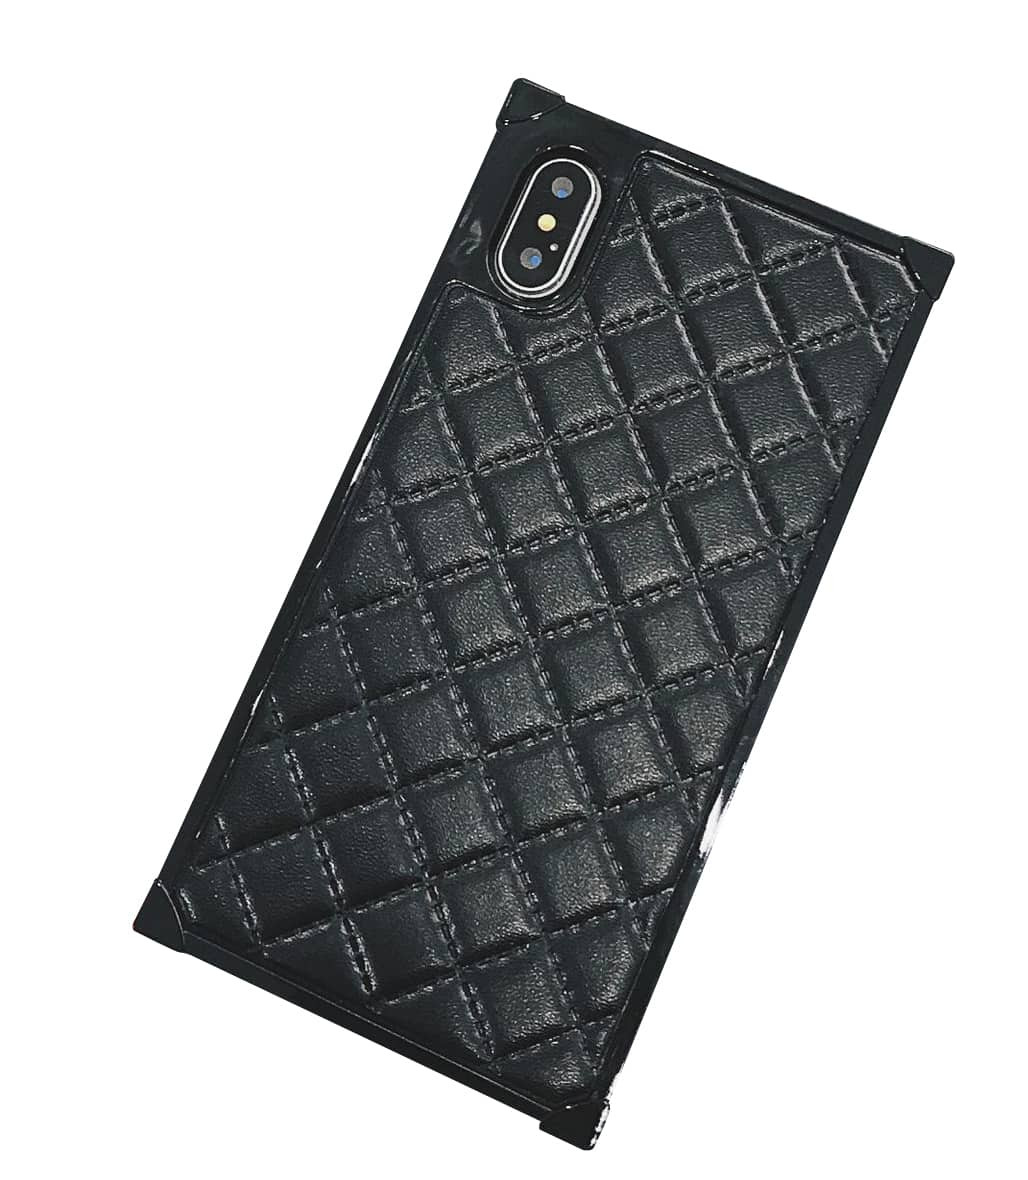 Silicone Designer Pattern Case For iPhone 8 7